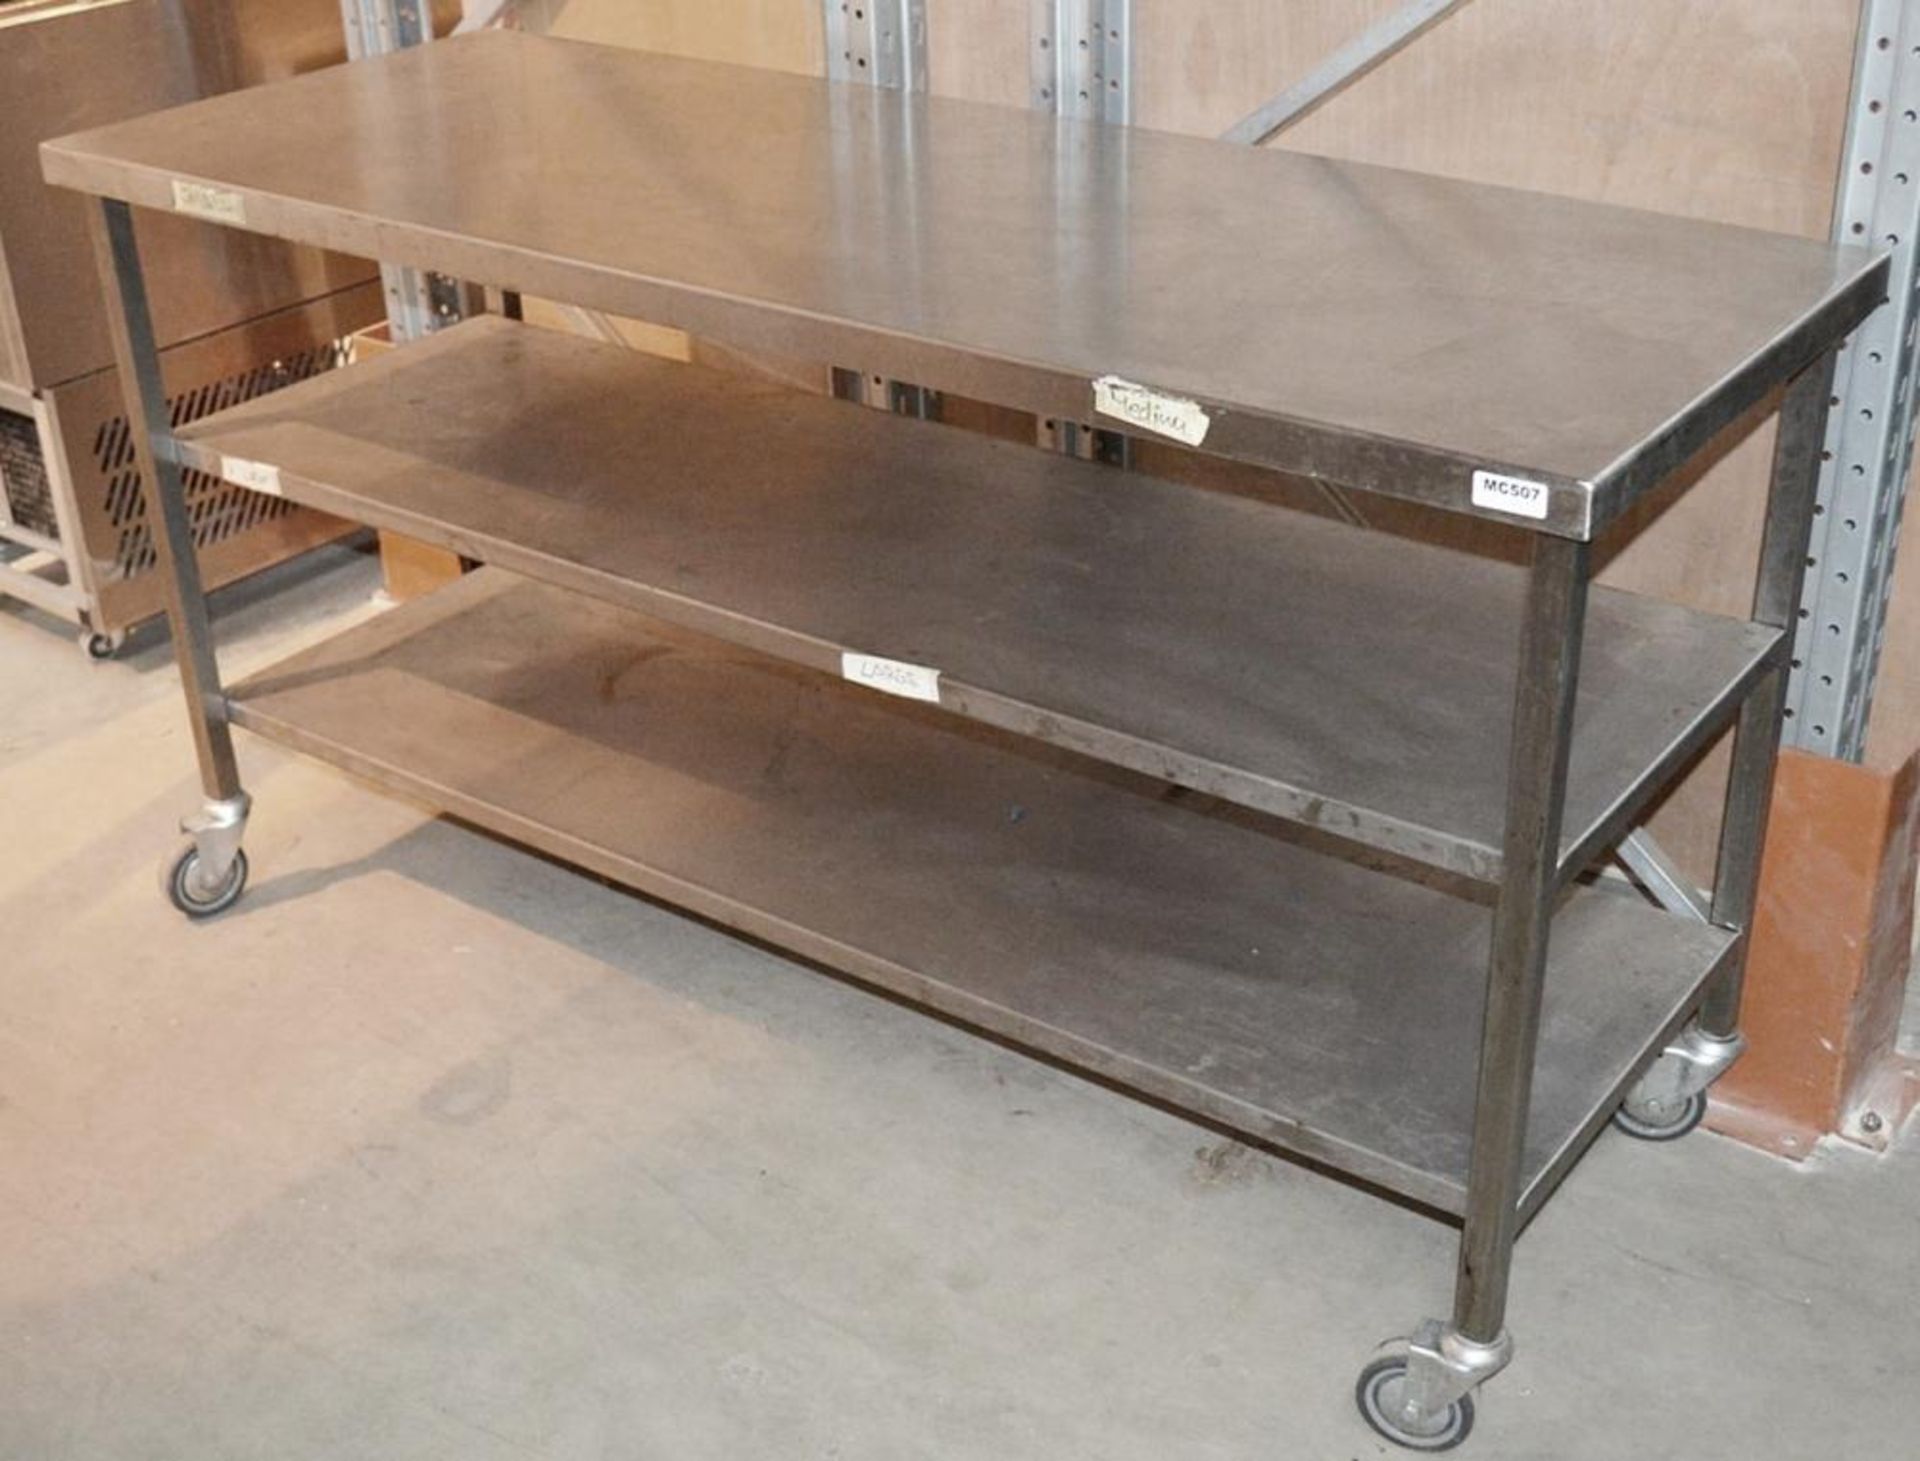 1 x Stainless Steel Commercial Kitchen Prep Table With Undershelves On Castors - Dimensions: W160 x